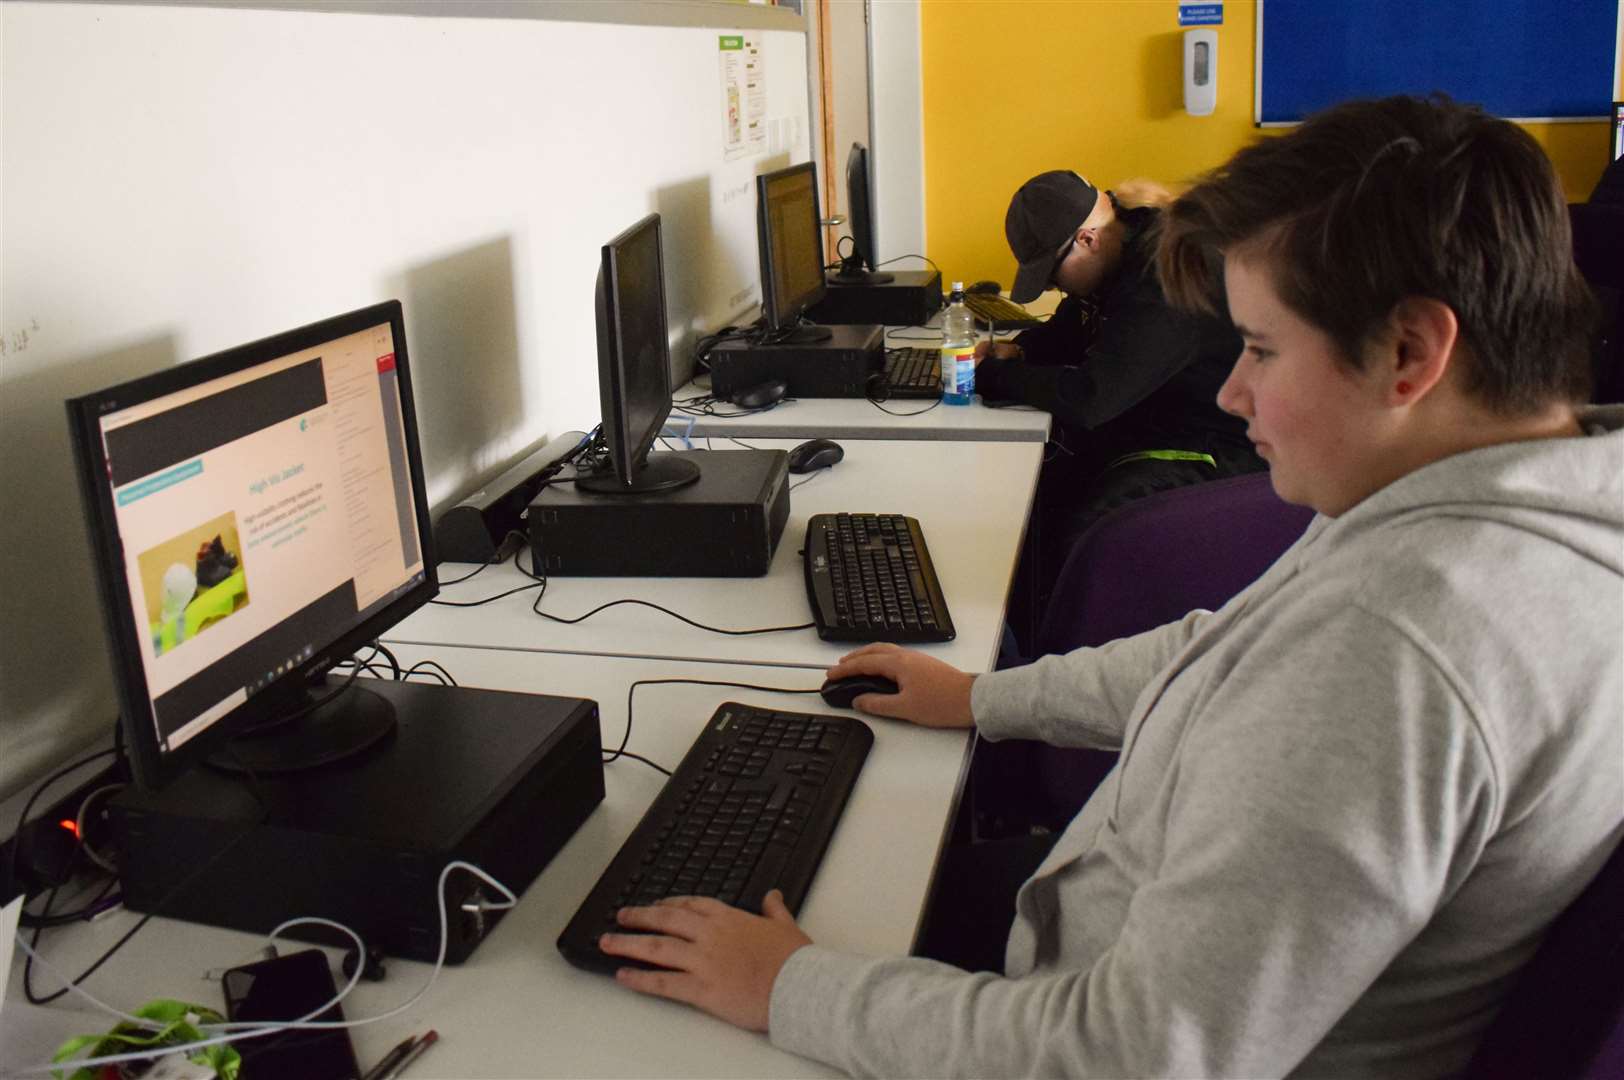 A construction student takes part in the online course. Picture: North Kent College